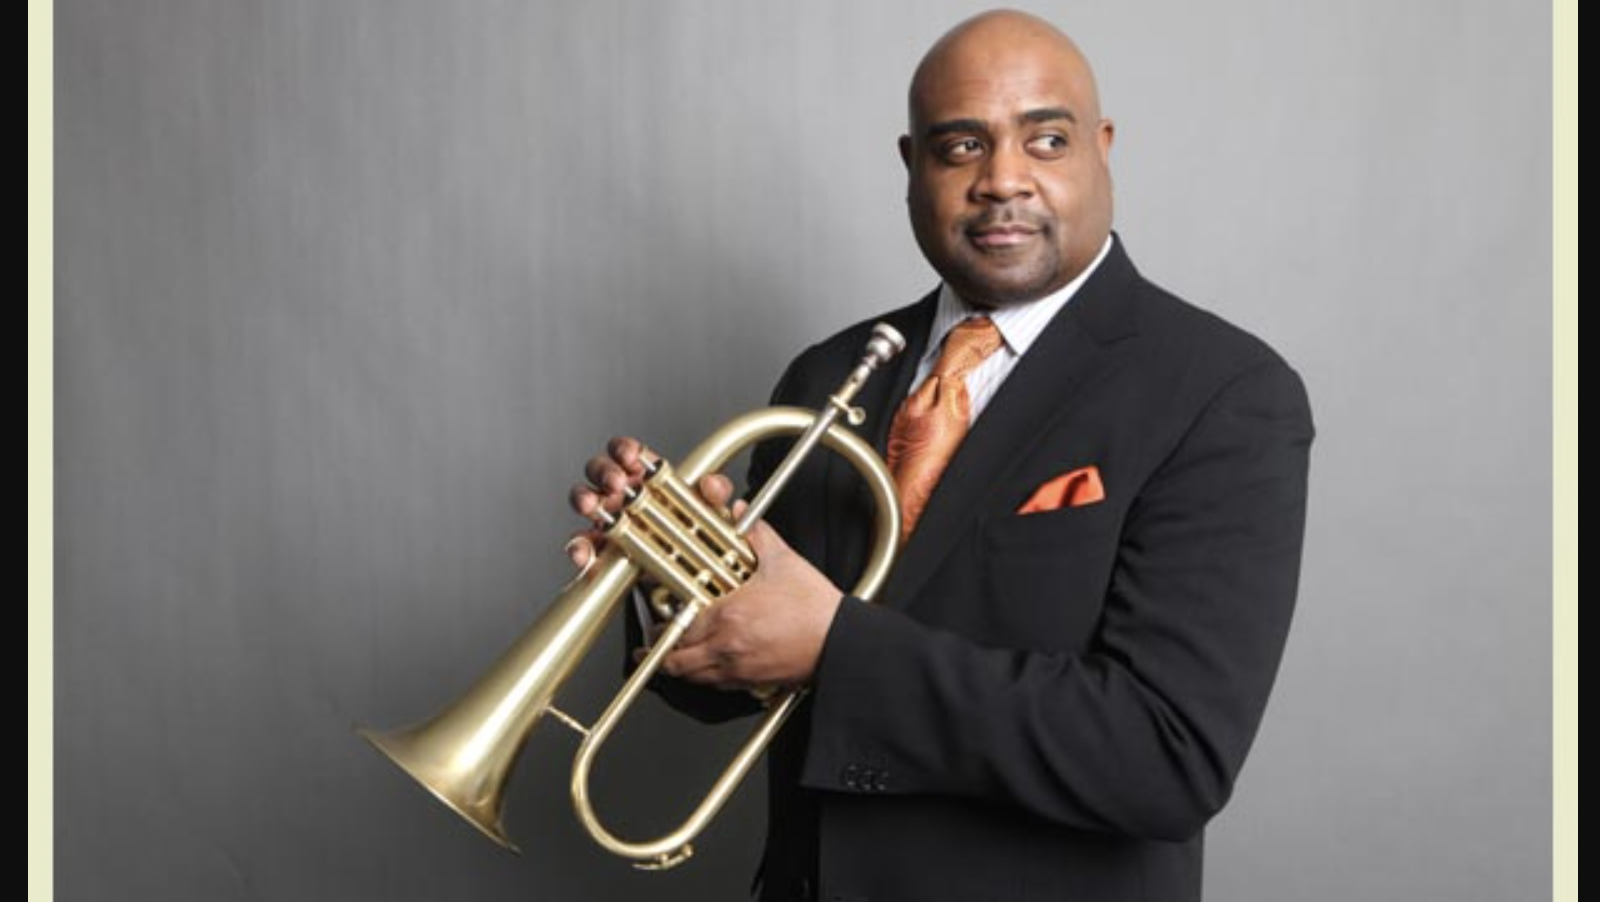 Trumpeter holds trumpet at Stanford Jazz Festival, coming in July